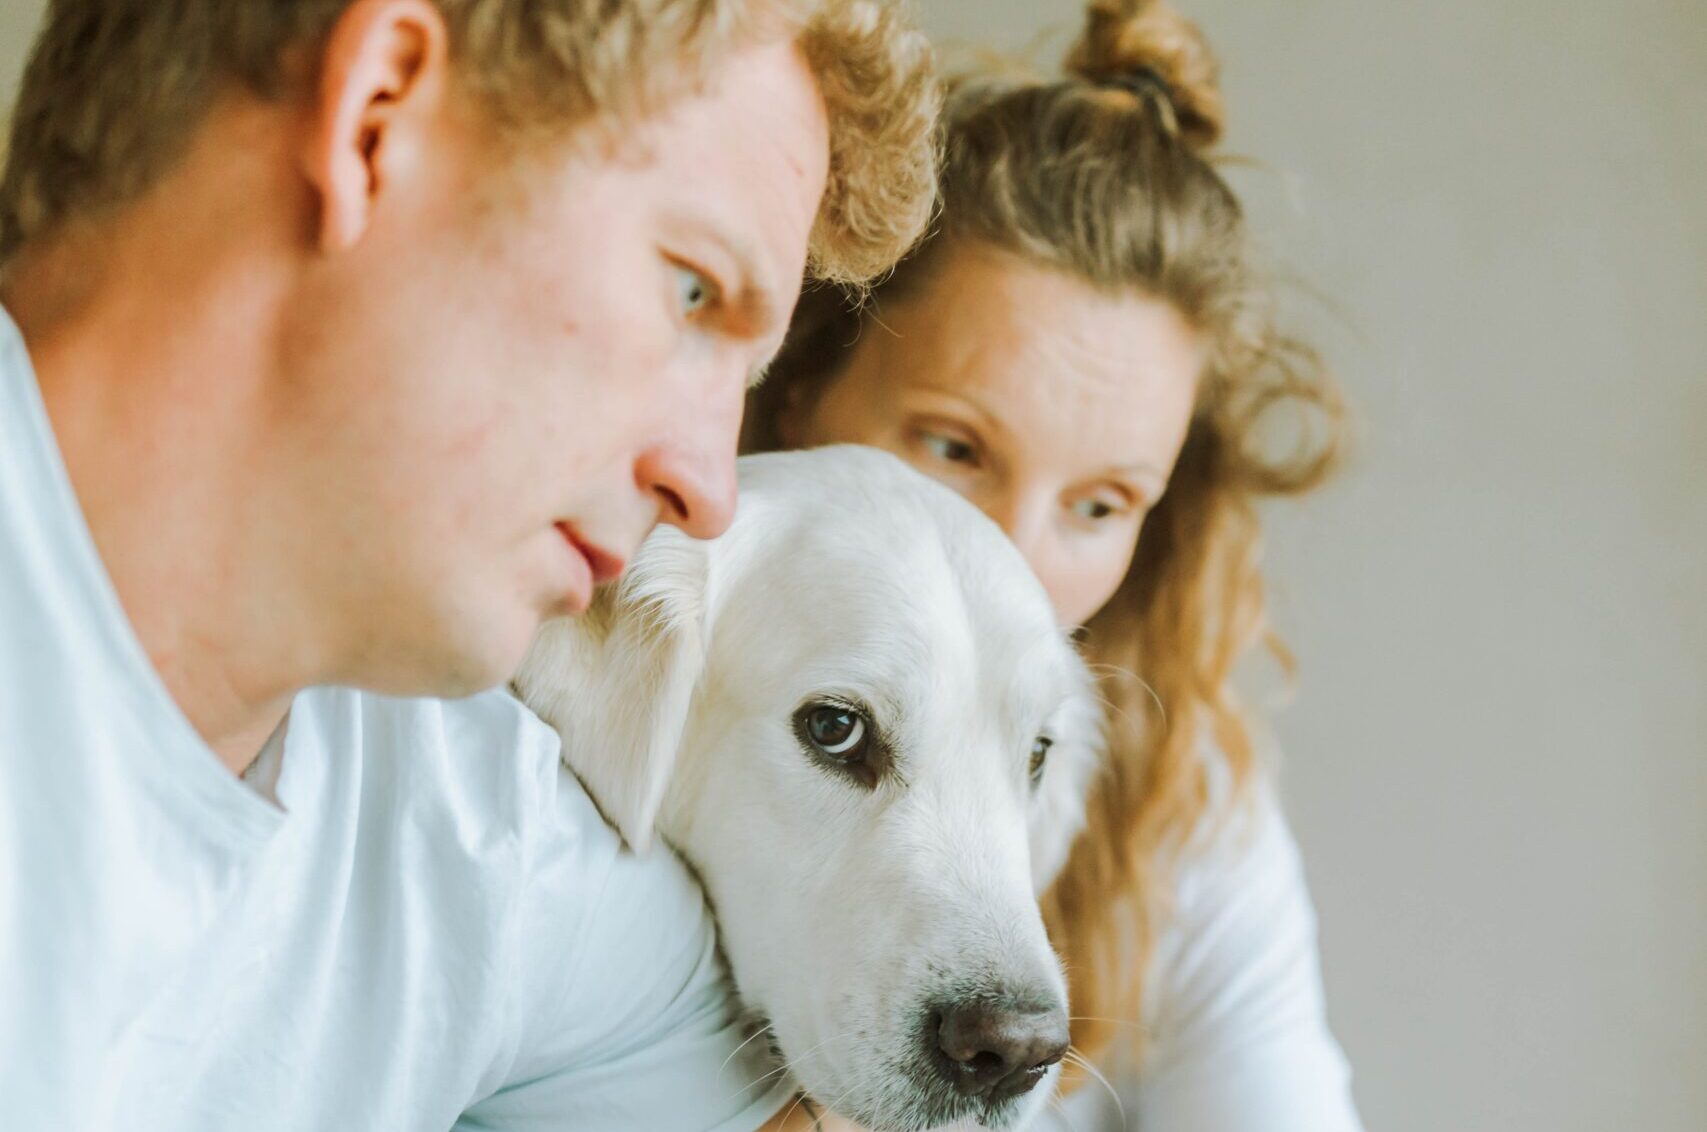 How Can I Prevent my to be Ex from Getting Custody of Our Dog?